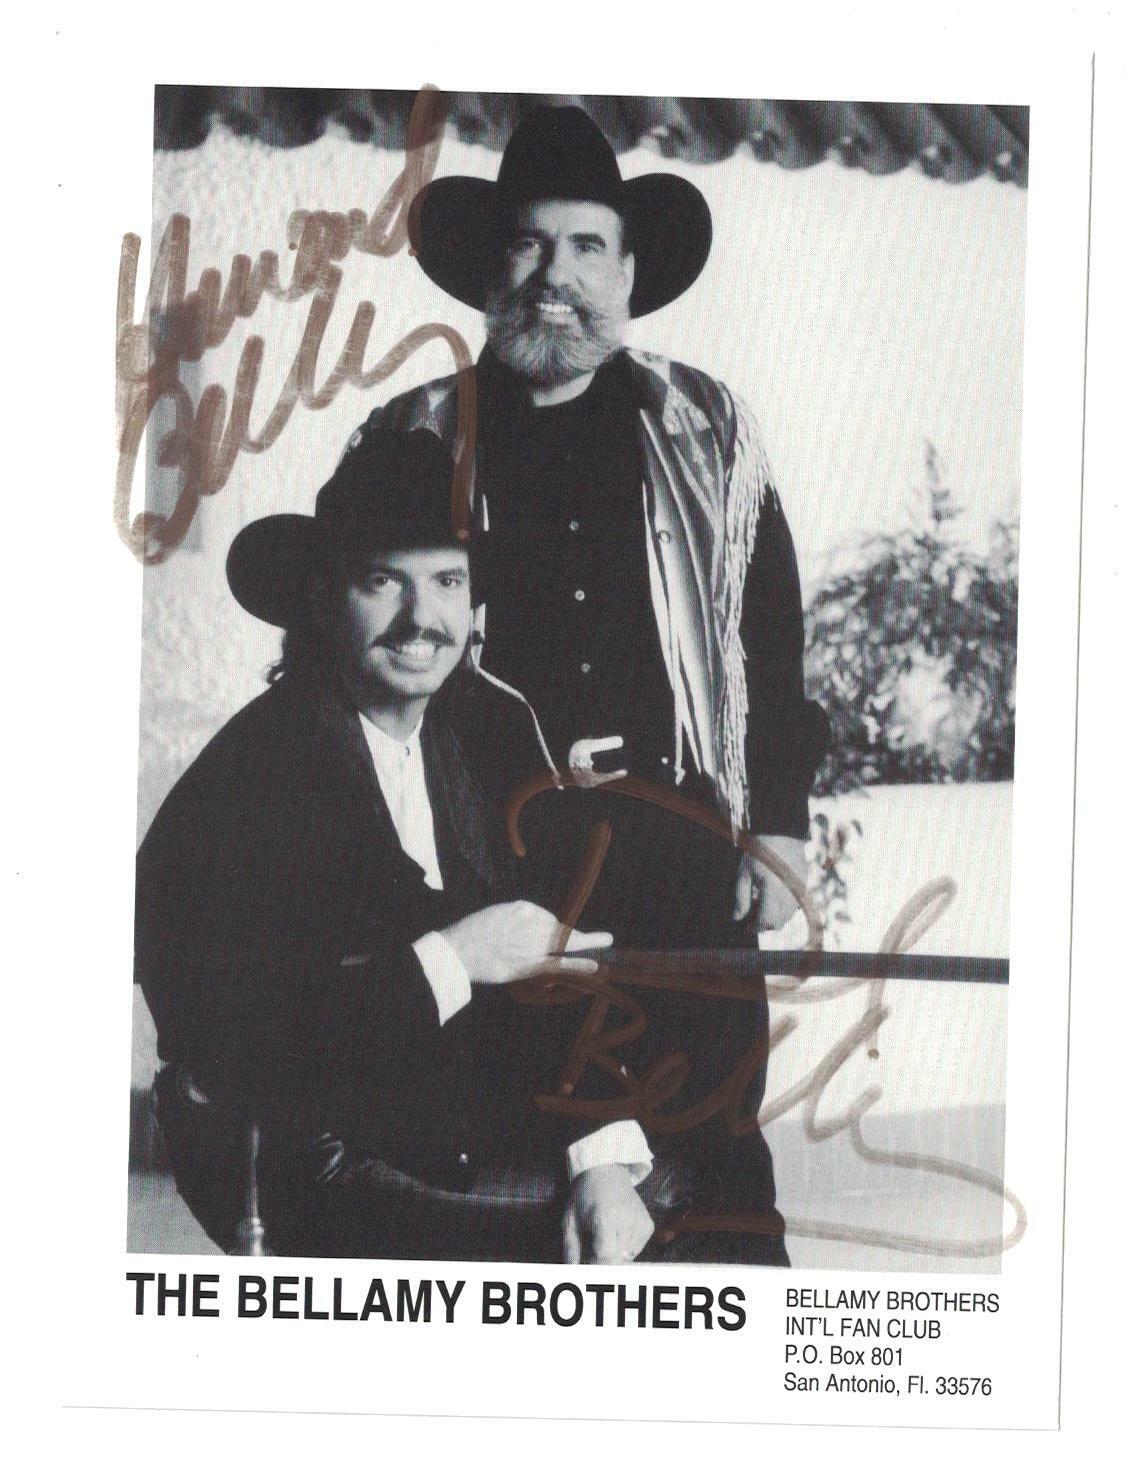 Howard & David Bellamy Signed 5x7 Photo Poster painting Country Music Singers Brothers